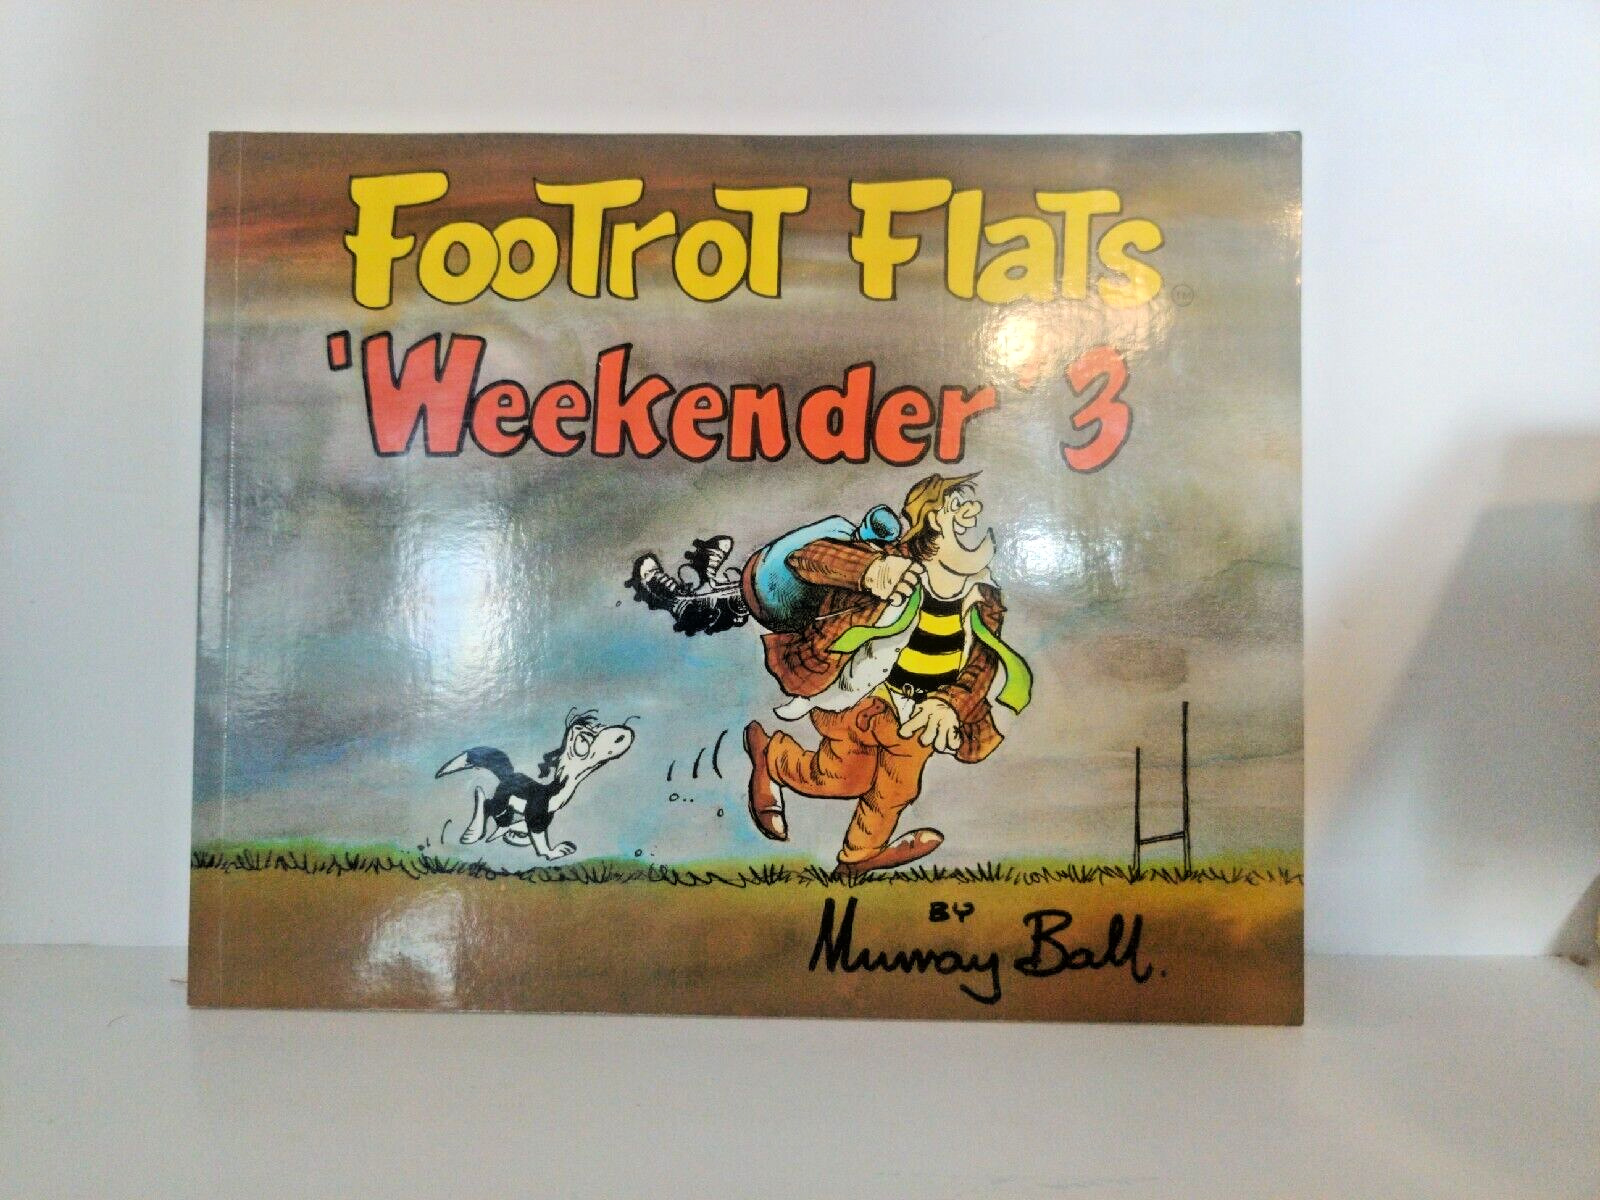 The Footrot Flats Weekender #3 1991 Classic by Murray Ball VERY GOOD CONDITION